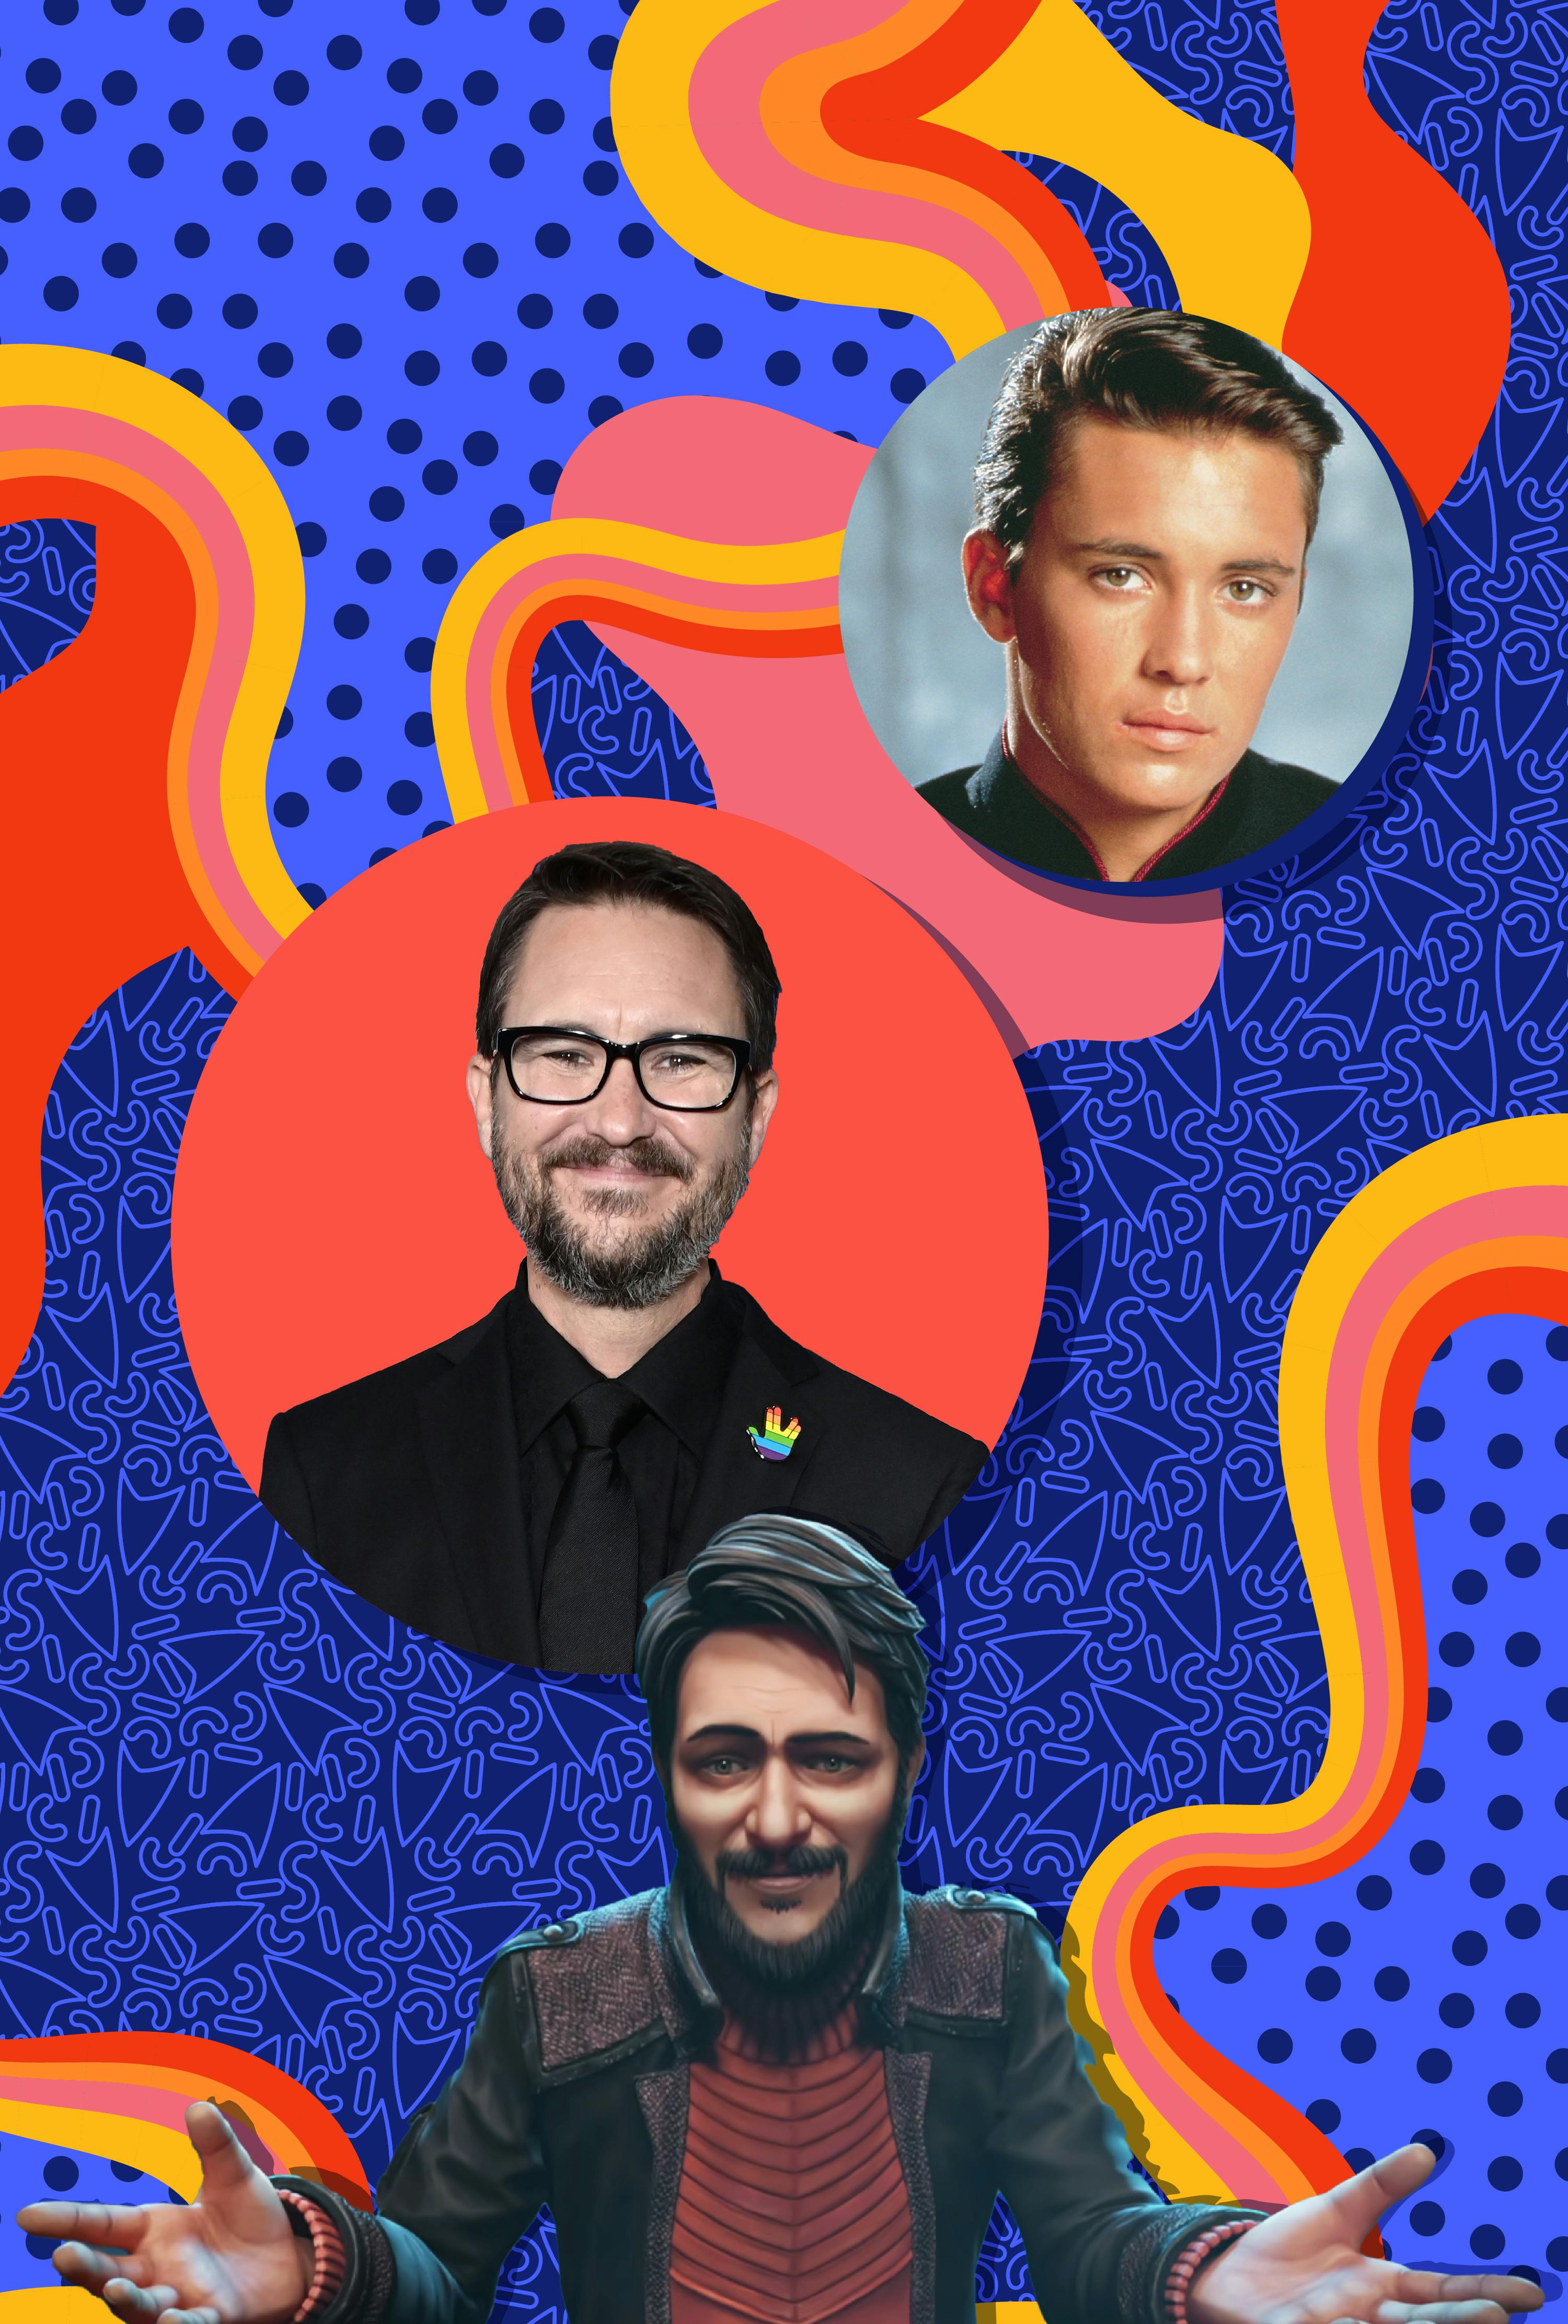 Graphic illustrated collage featuring Wil Wheaton and promo images of Wesley Crusher from Star Trek: The Next Generation and Star Trek: Prodigy